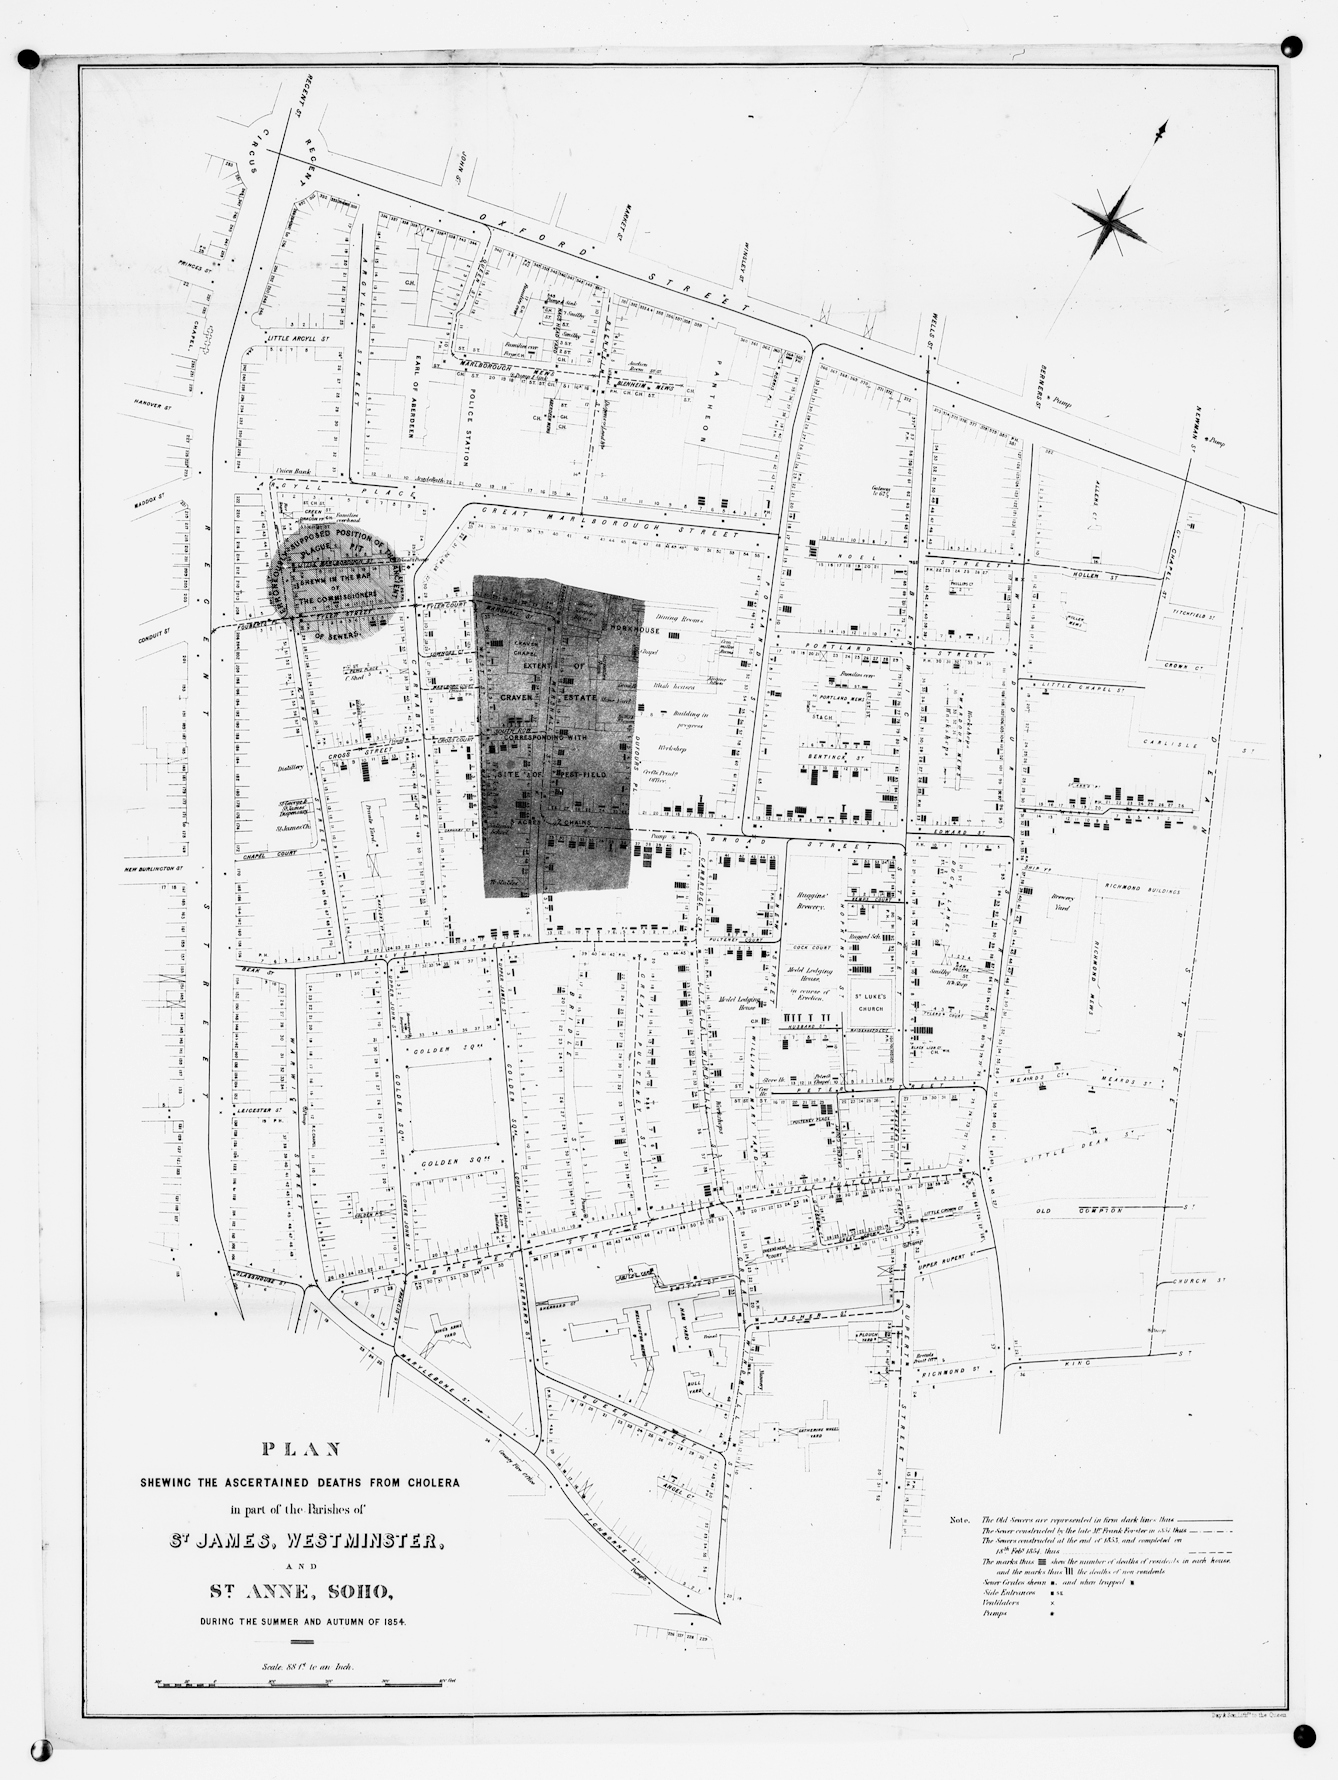 Plan showing the deaths from cholera, London, 1854, in St James, Westminster and St Anne, Soho